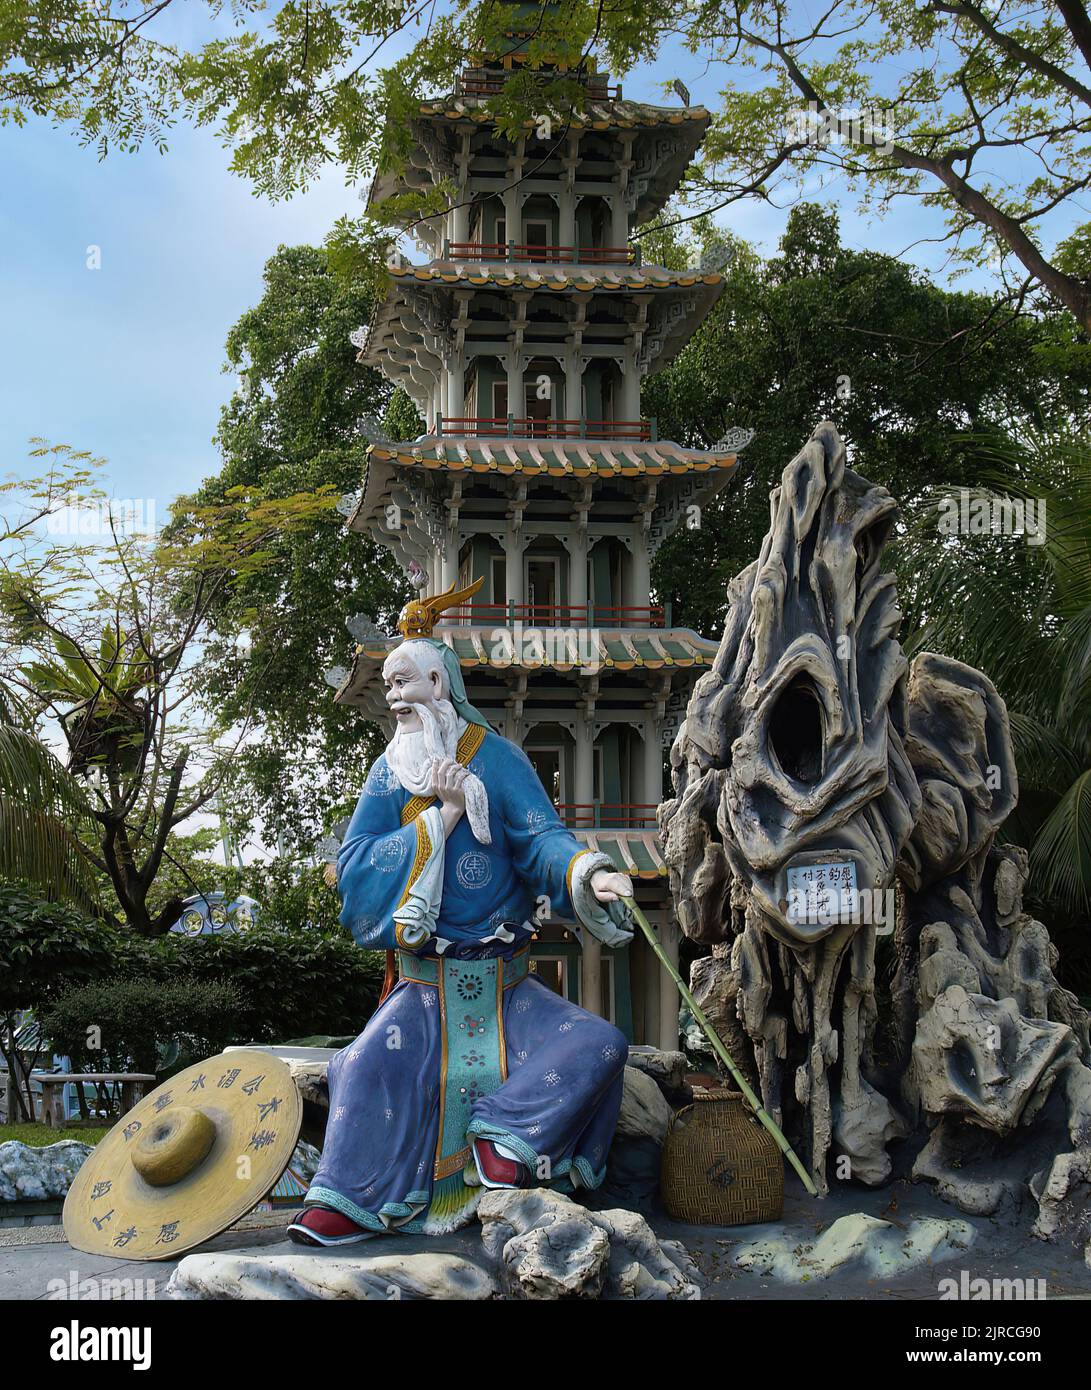 Haw Par Villa or Tiger Balm Garden contains over 1,000 statues and 150 giant dioramas depicting scenes from Chinese mythology ( Stock Photo